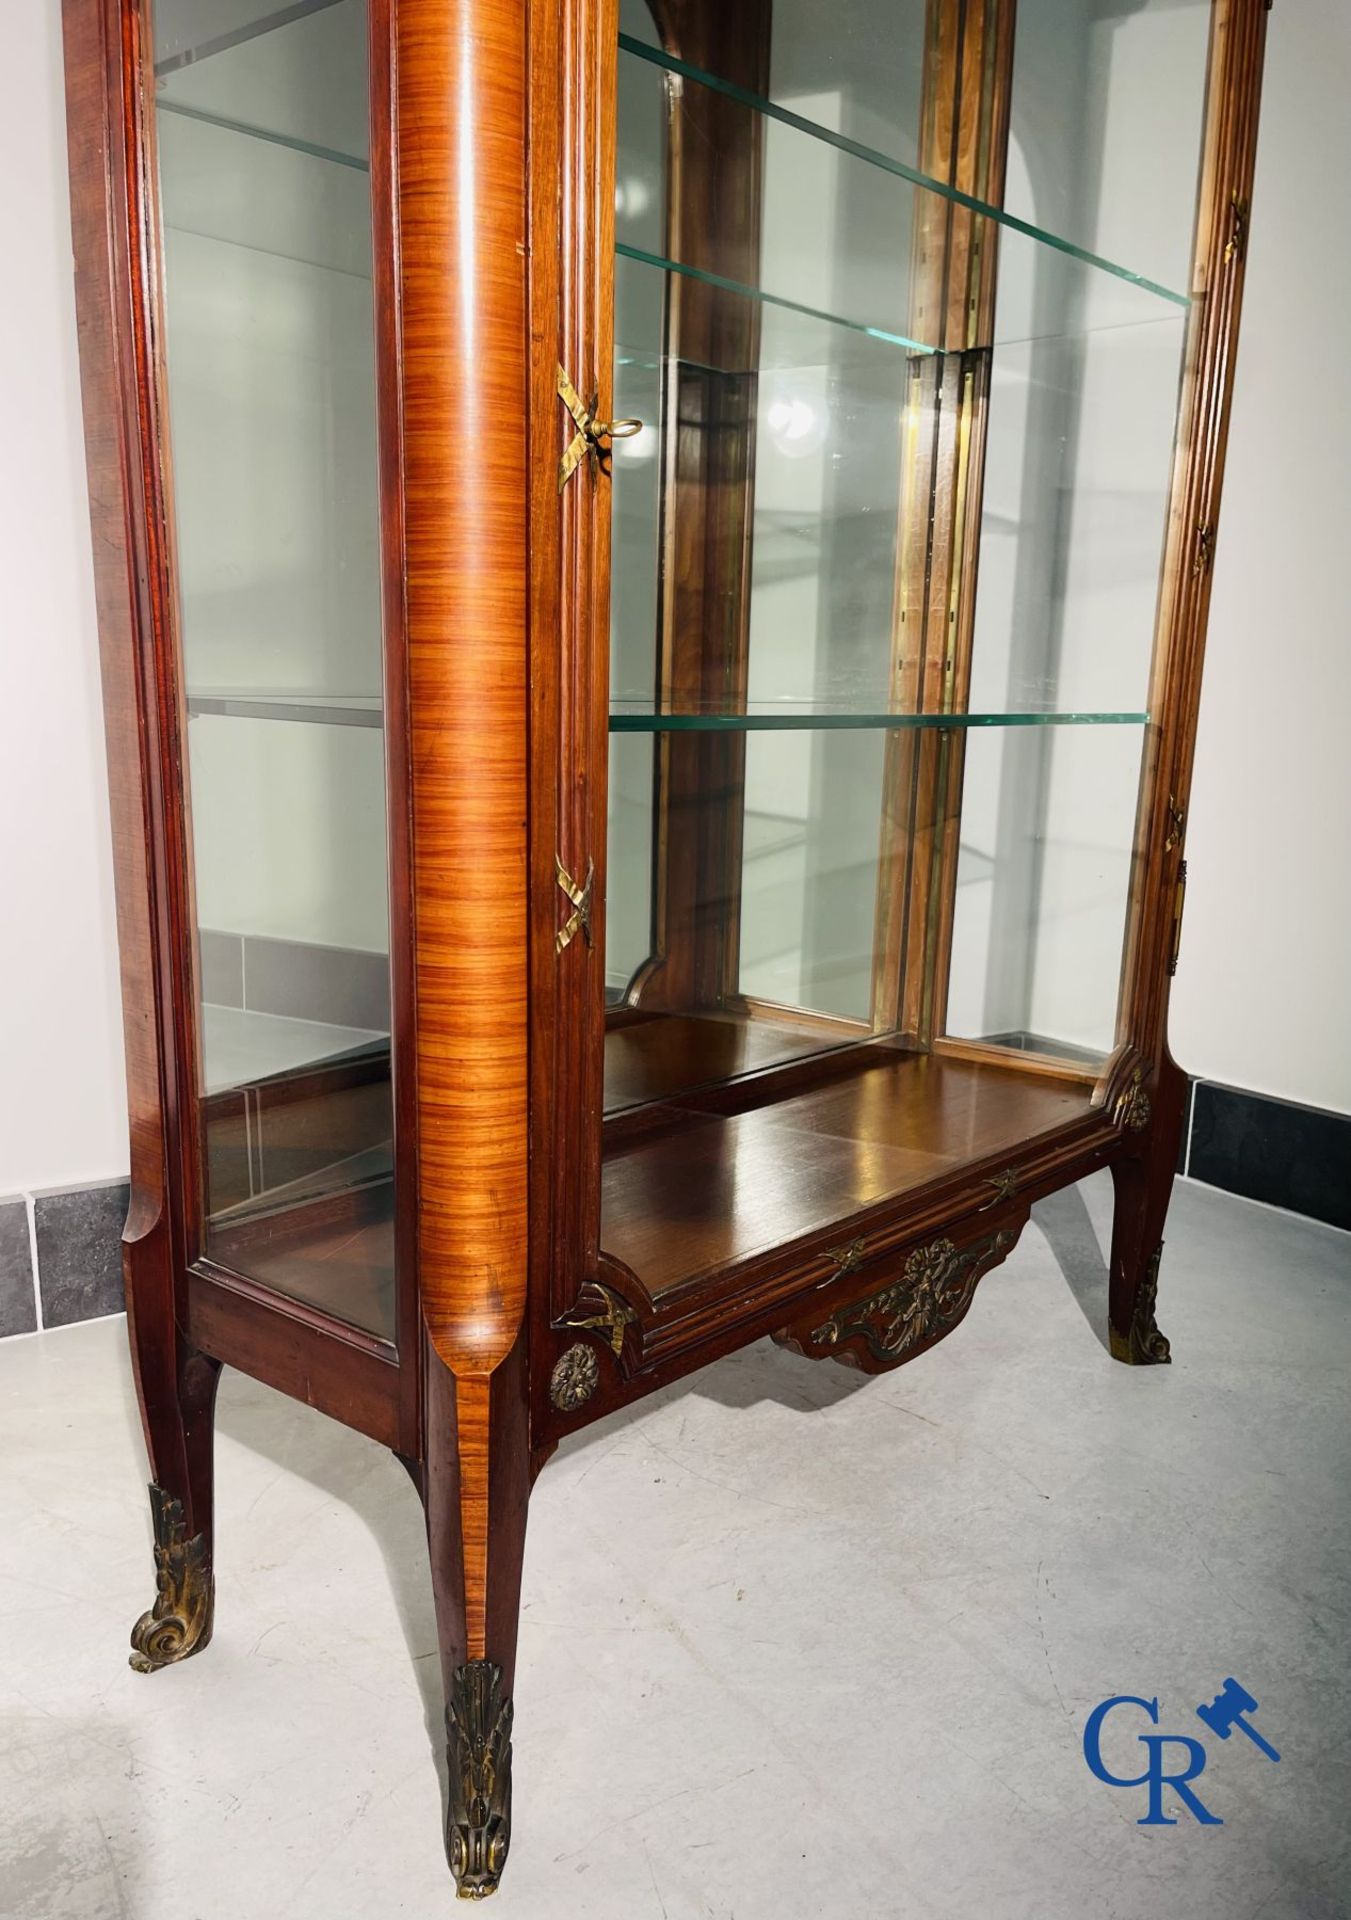 Display cabinet in LXVI style with bronze fittings. period 1900-1920 - Image 4 of 17